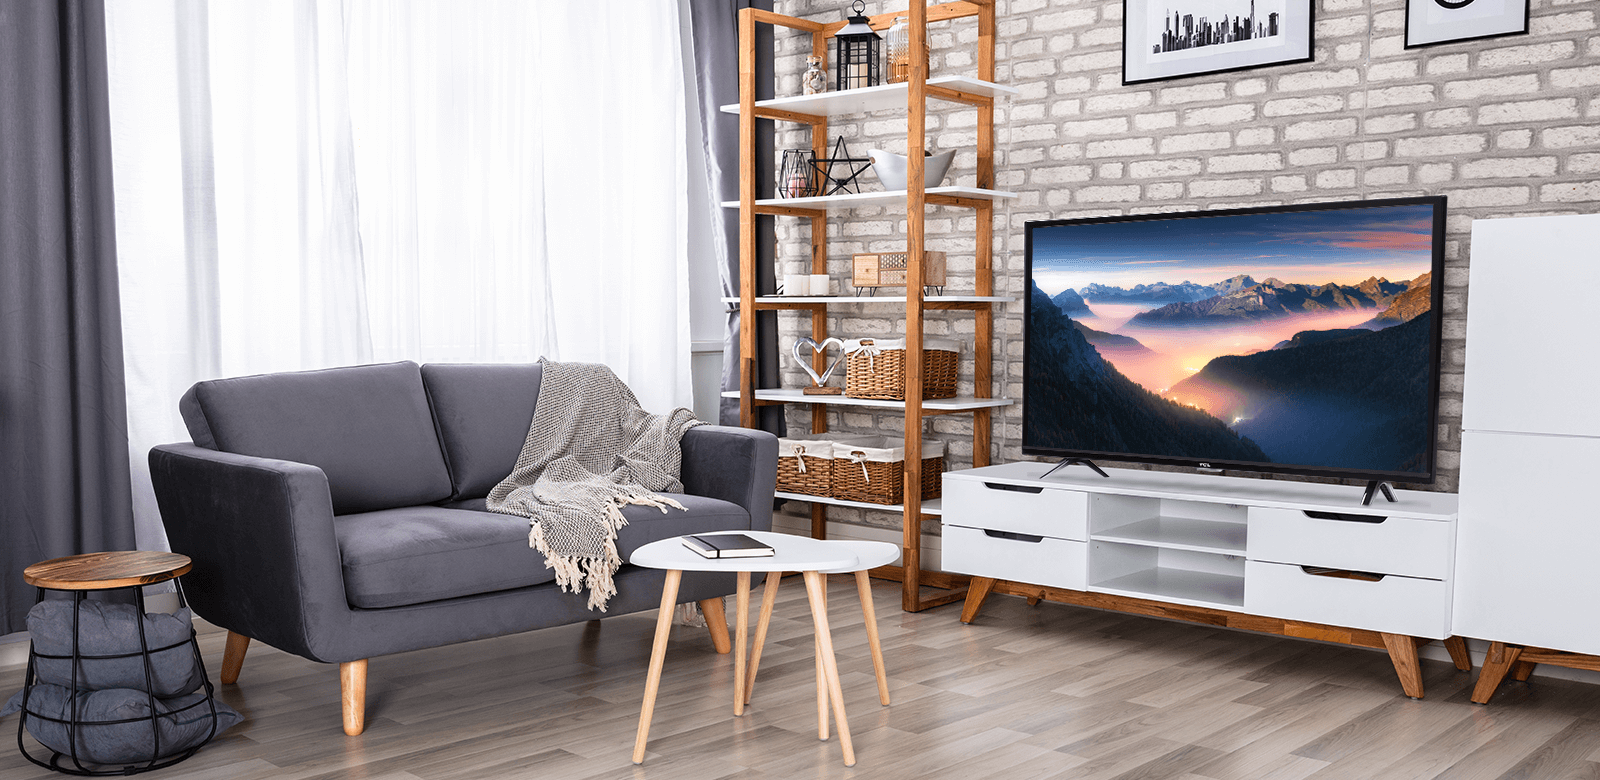 TCL ANDROID SMART LED TV  Badcock Home Furniture &more